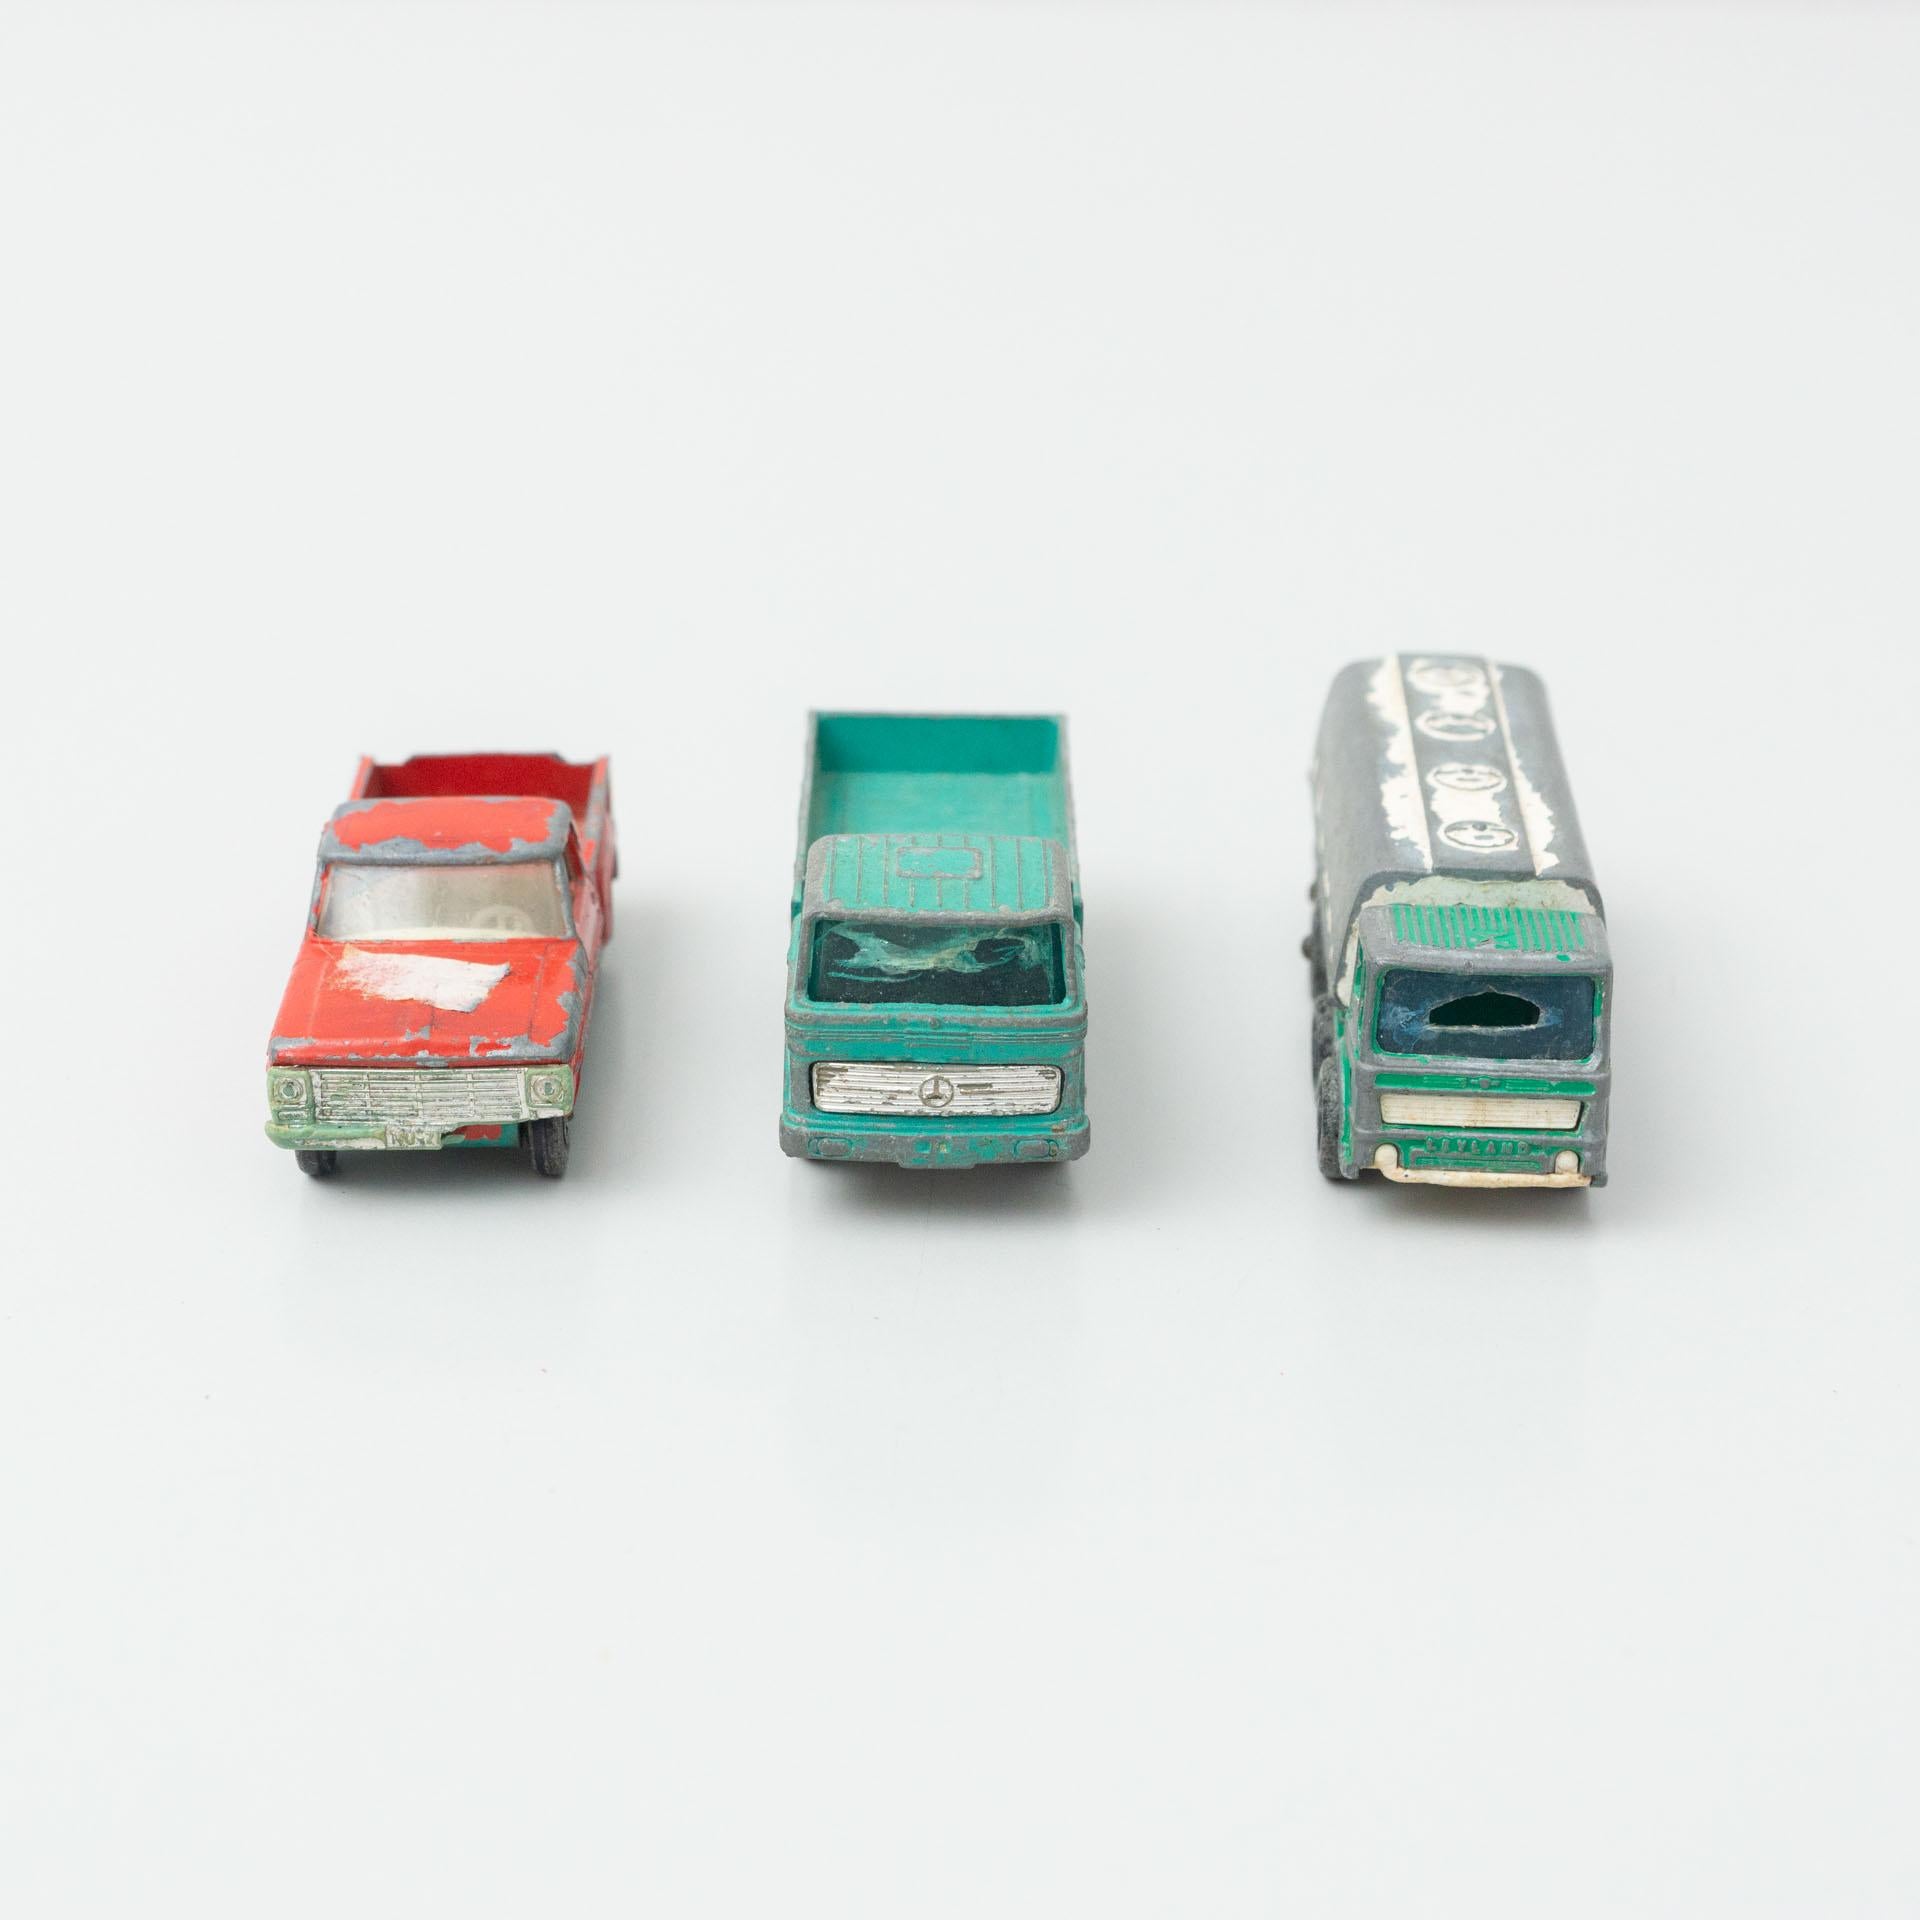 Set of three vintage toy cars.
By unnknown manufacturer, circa 1960.

In original condition, with minor wear consistent with age and use, preserving a beautiful patina.

Materials:
Metal
Plastic

Dimensions (each one):
D 7.5 cm x W 3 cm x